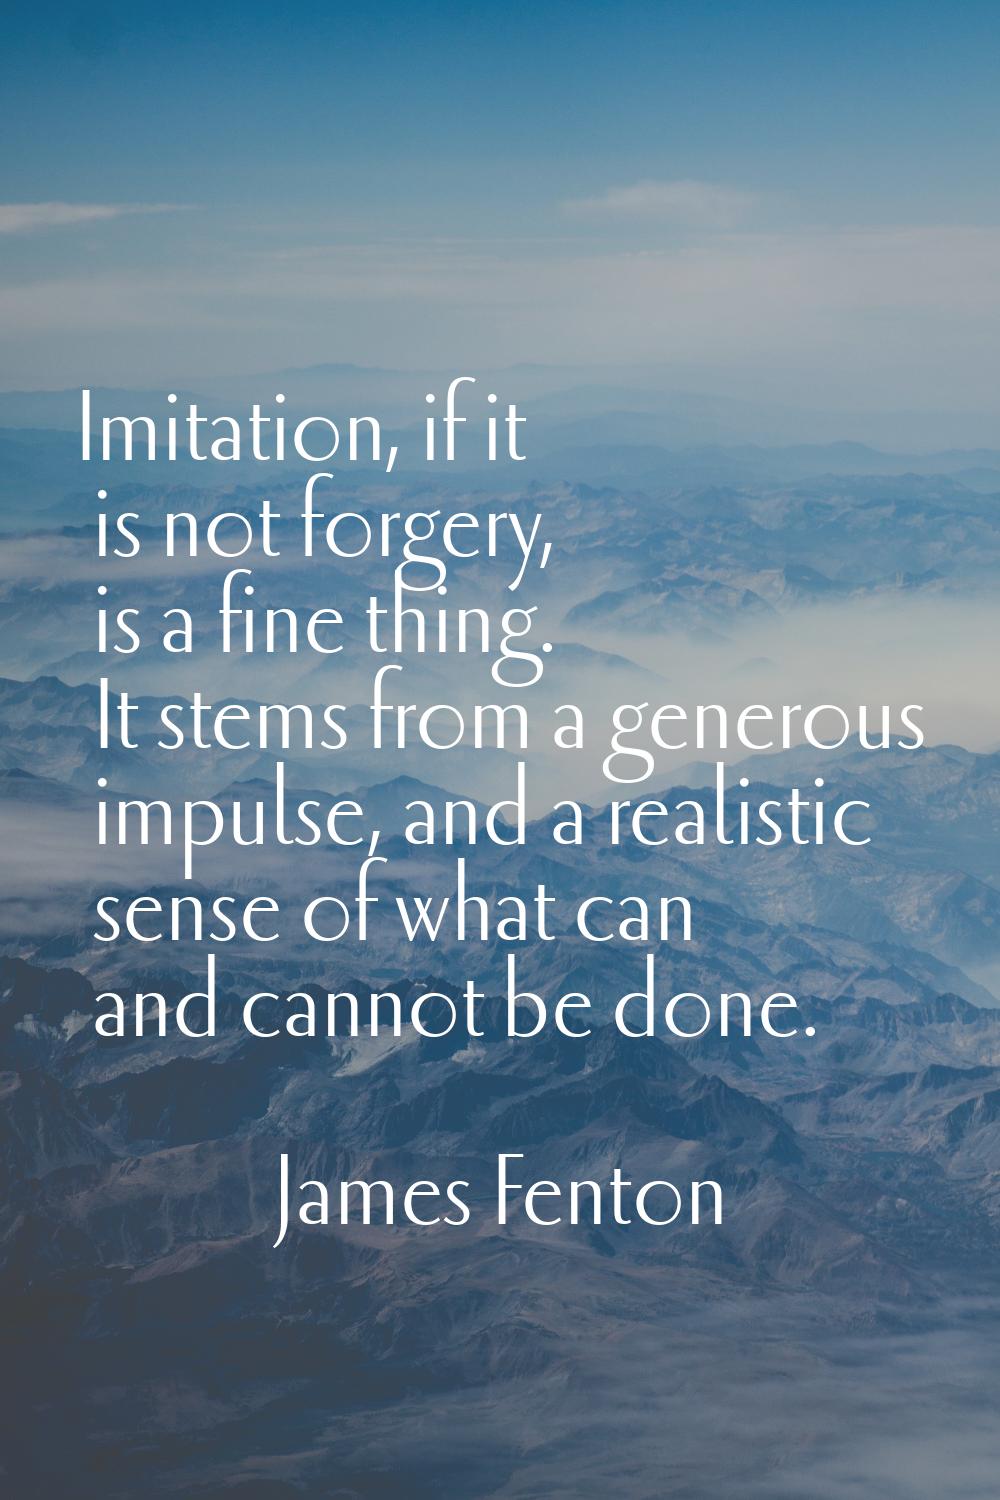 Imitation, if it is not forgery, is a fine thing. It stems from a generous impulse, and a realistic